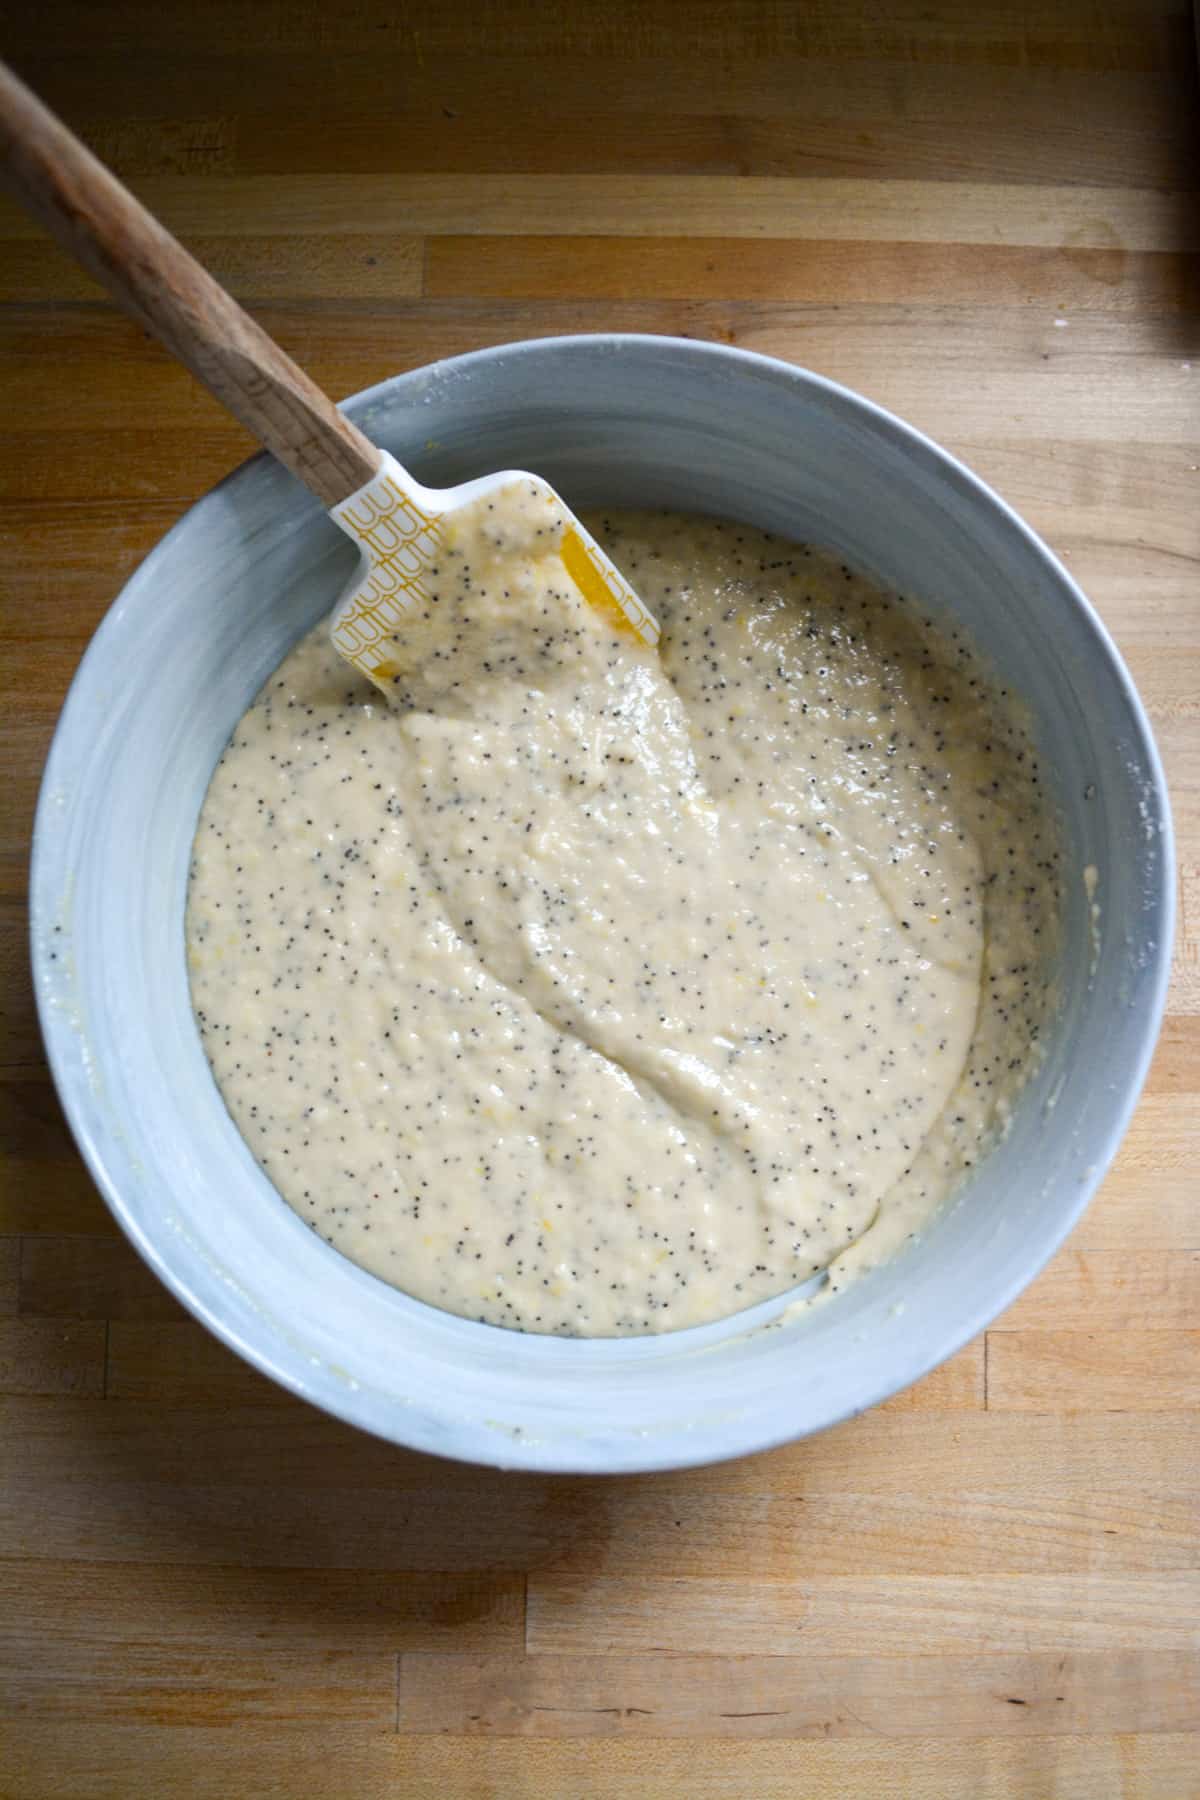 Mixed Vegan Lemon Poppy Seed Muffin batter in a mixing bowl with a rubber spatula in it.